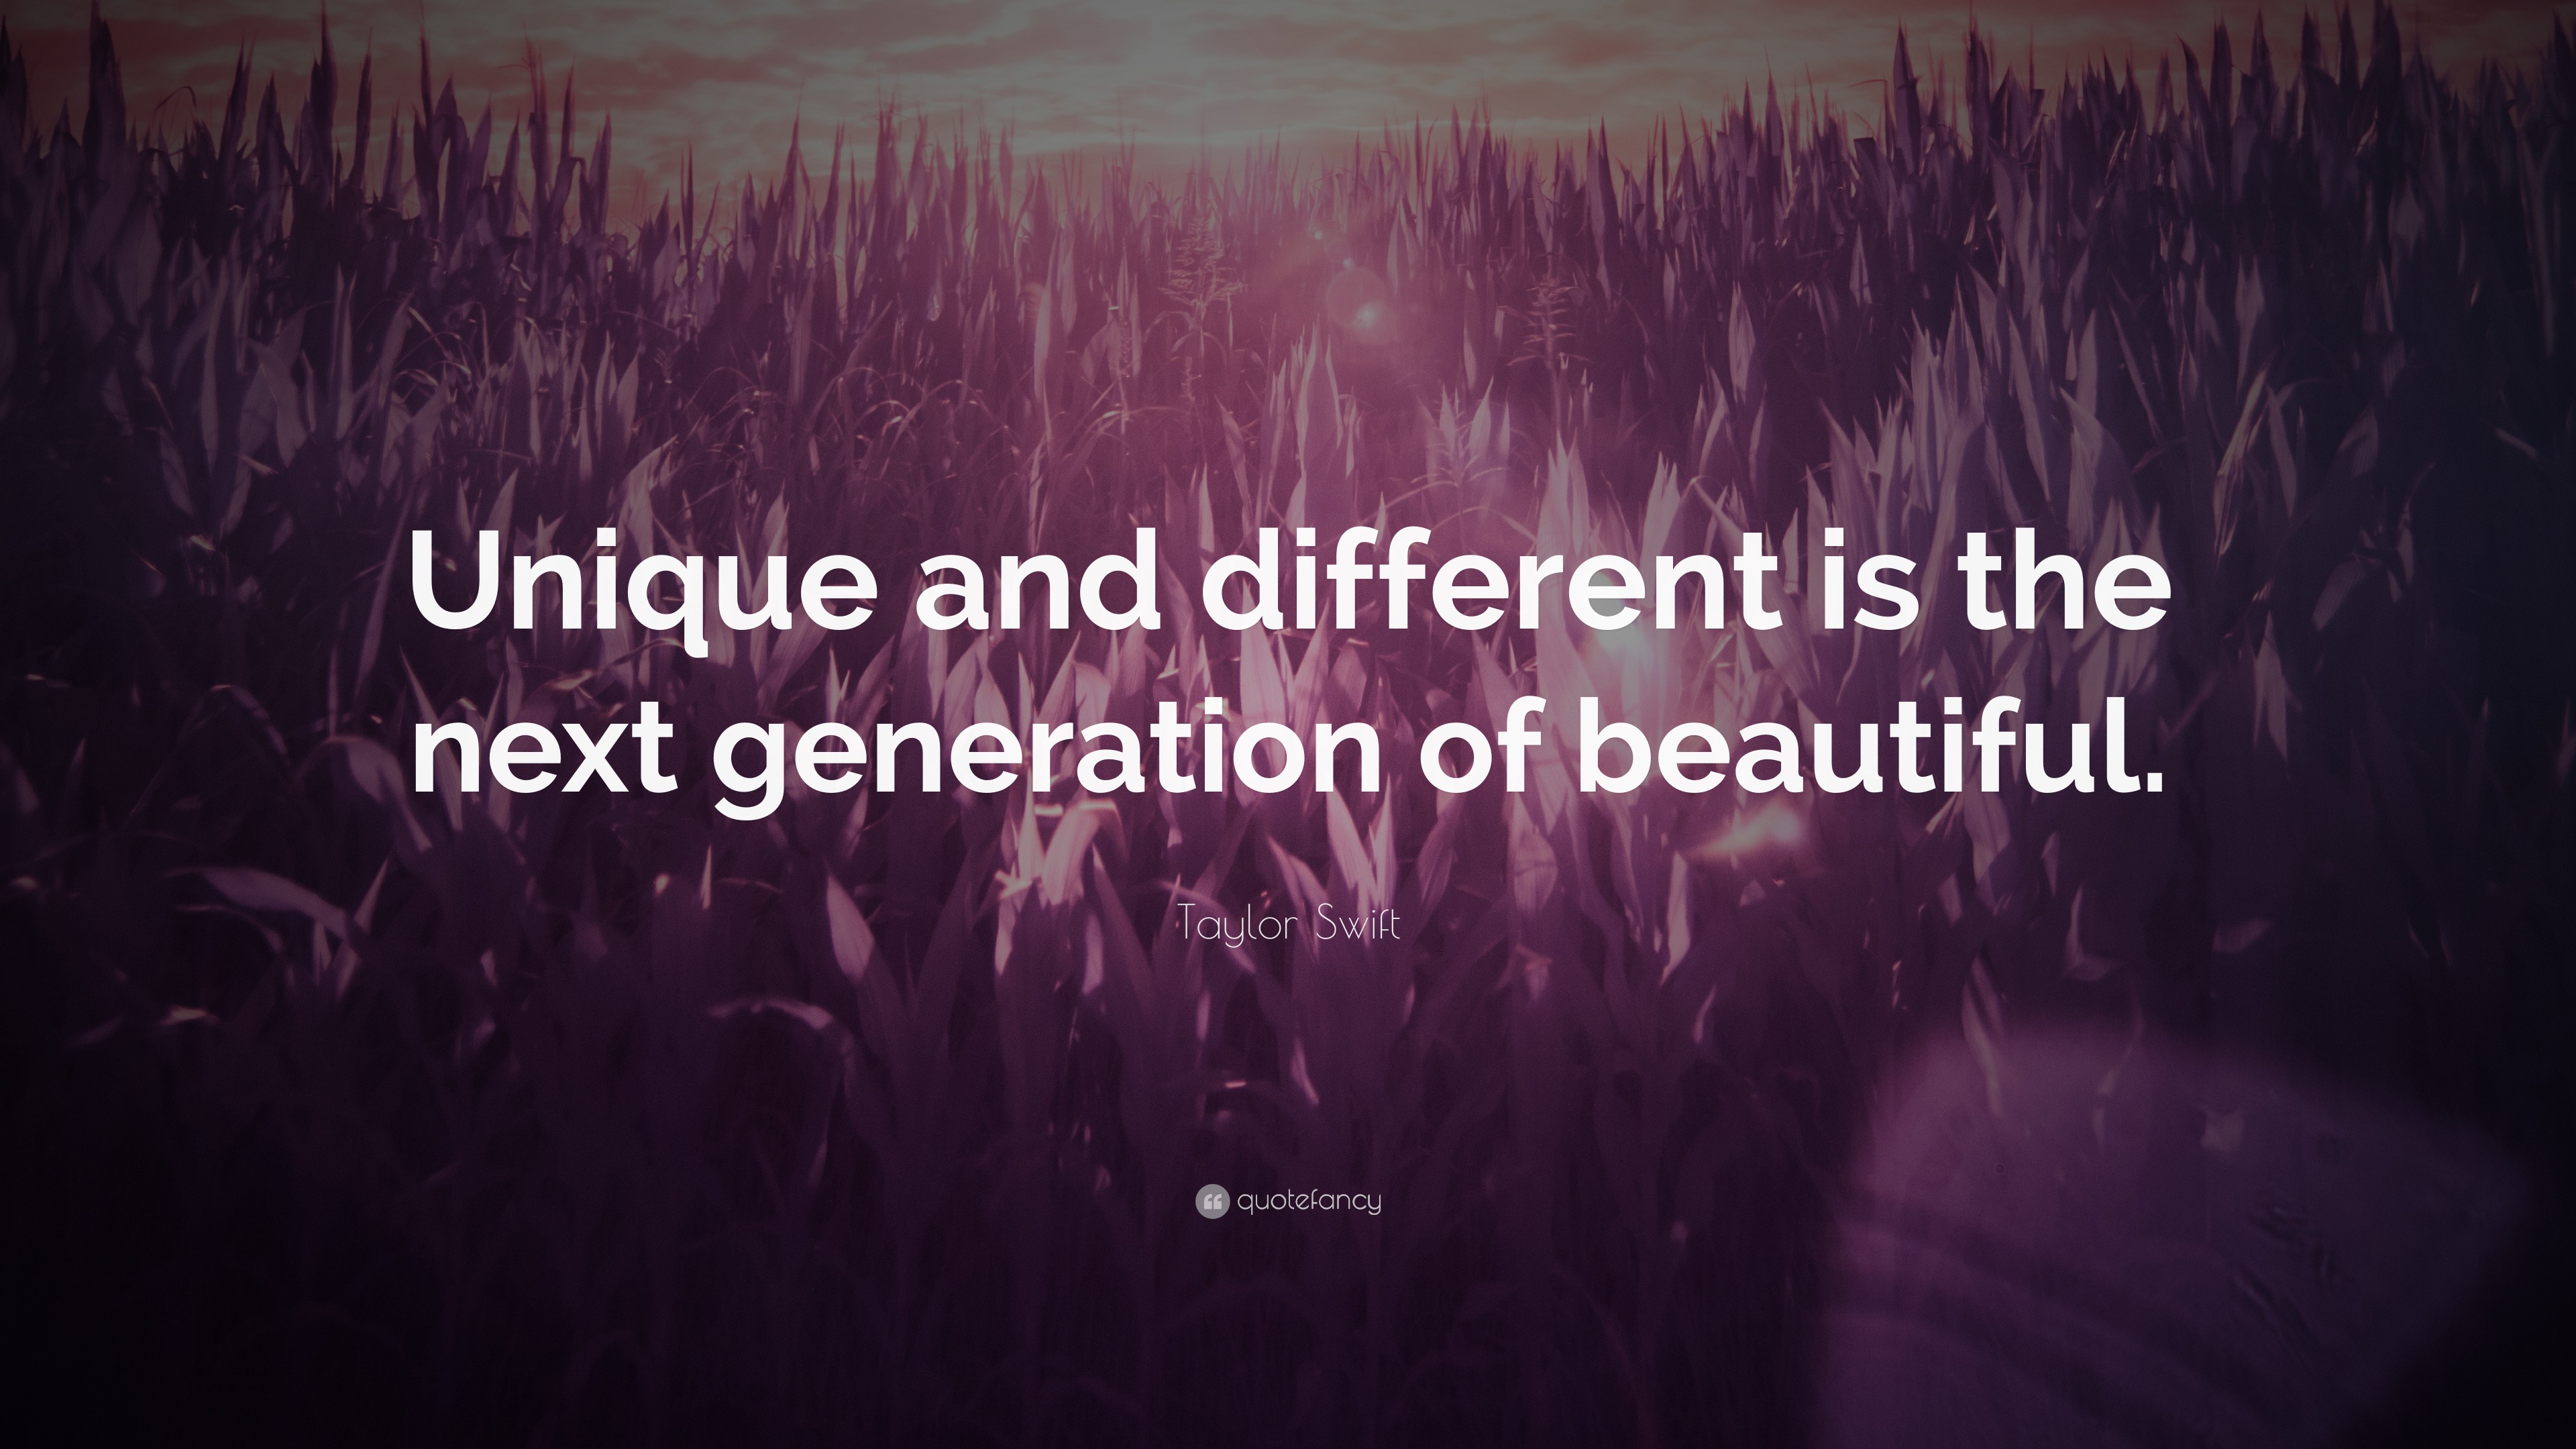 Taylor Swift Quote: “Unique and different is the next generation